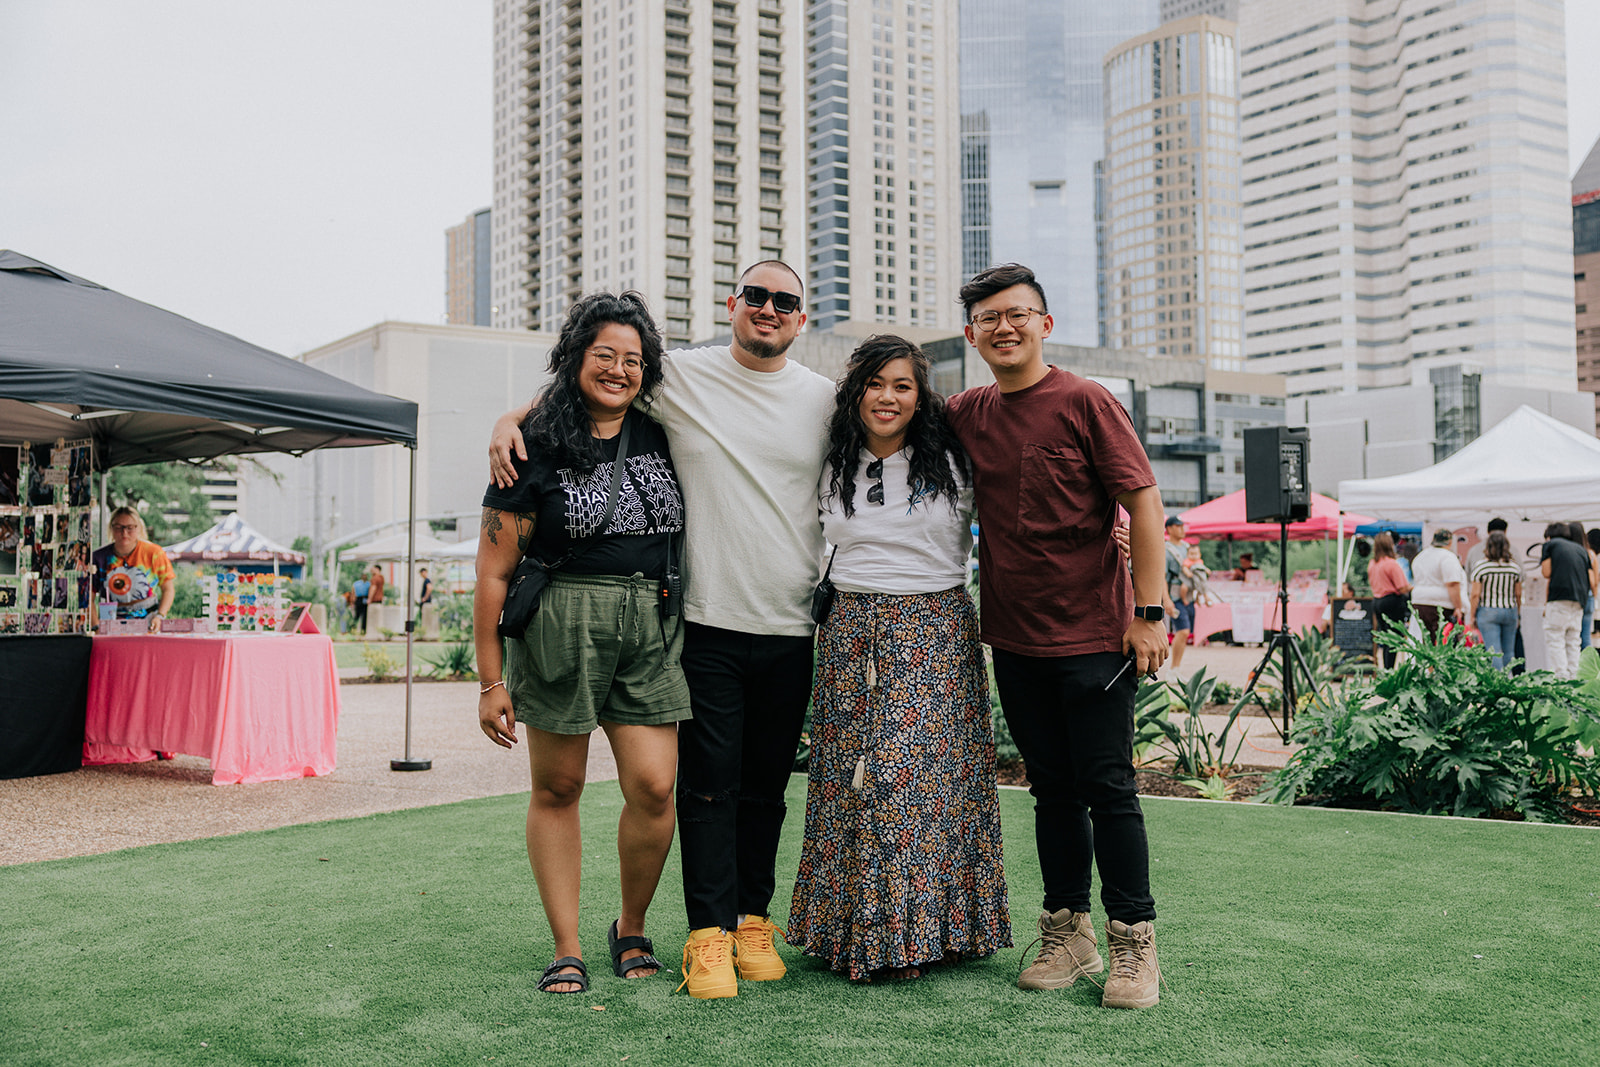 Have a Nice Day Market founders Isabel Protomartir, Brian Rama, Julie Nong, and Michael Ma pose for a picture in front of the backdrop of Downtwon.